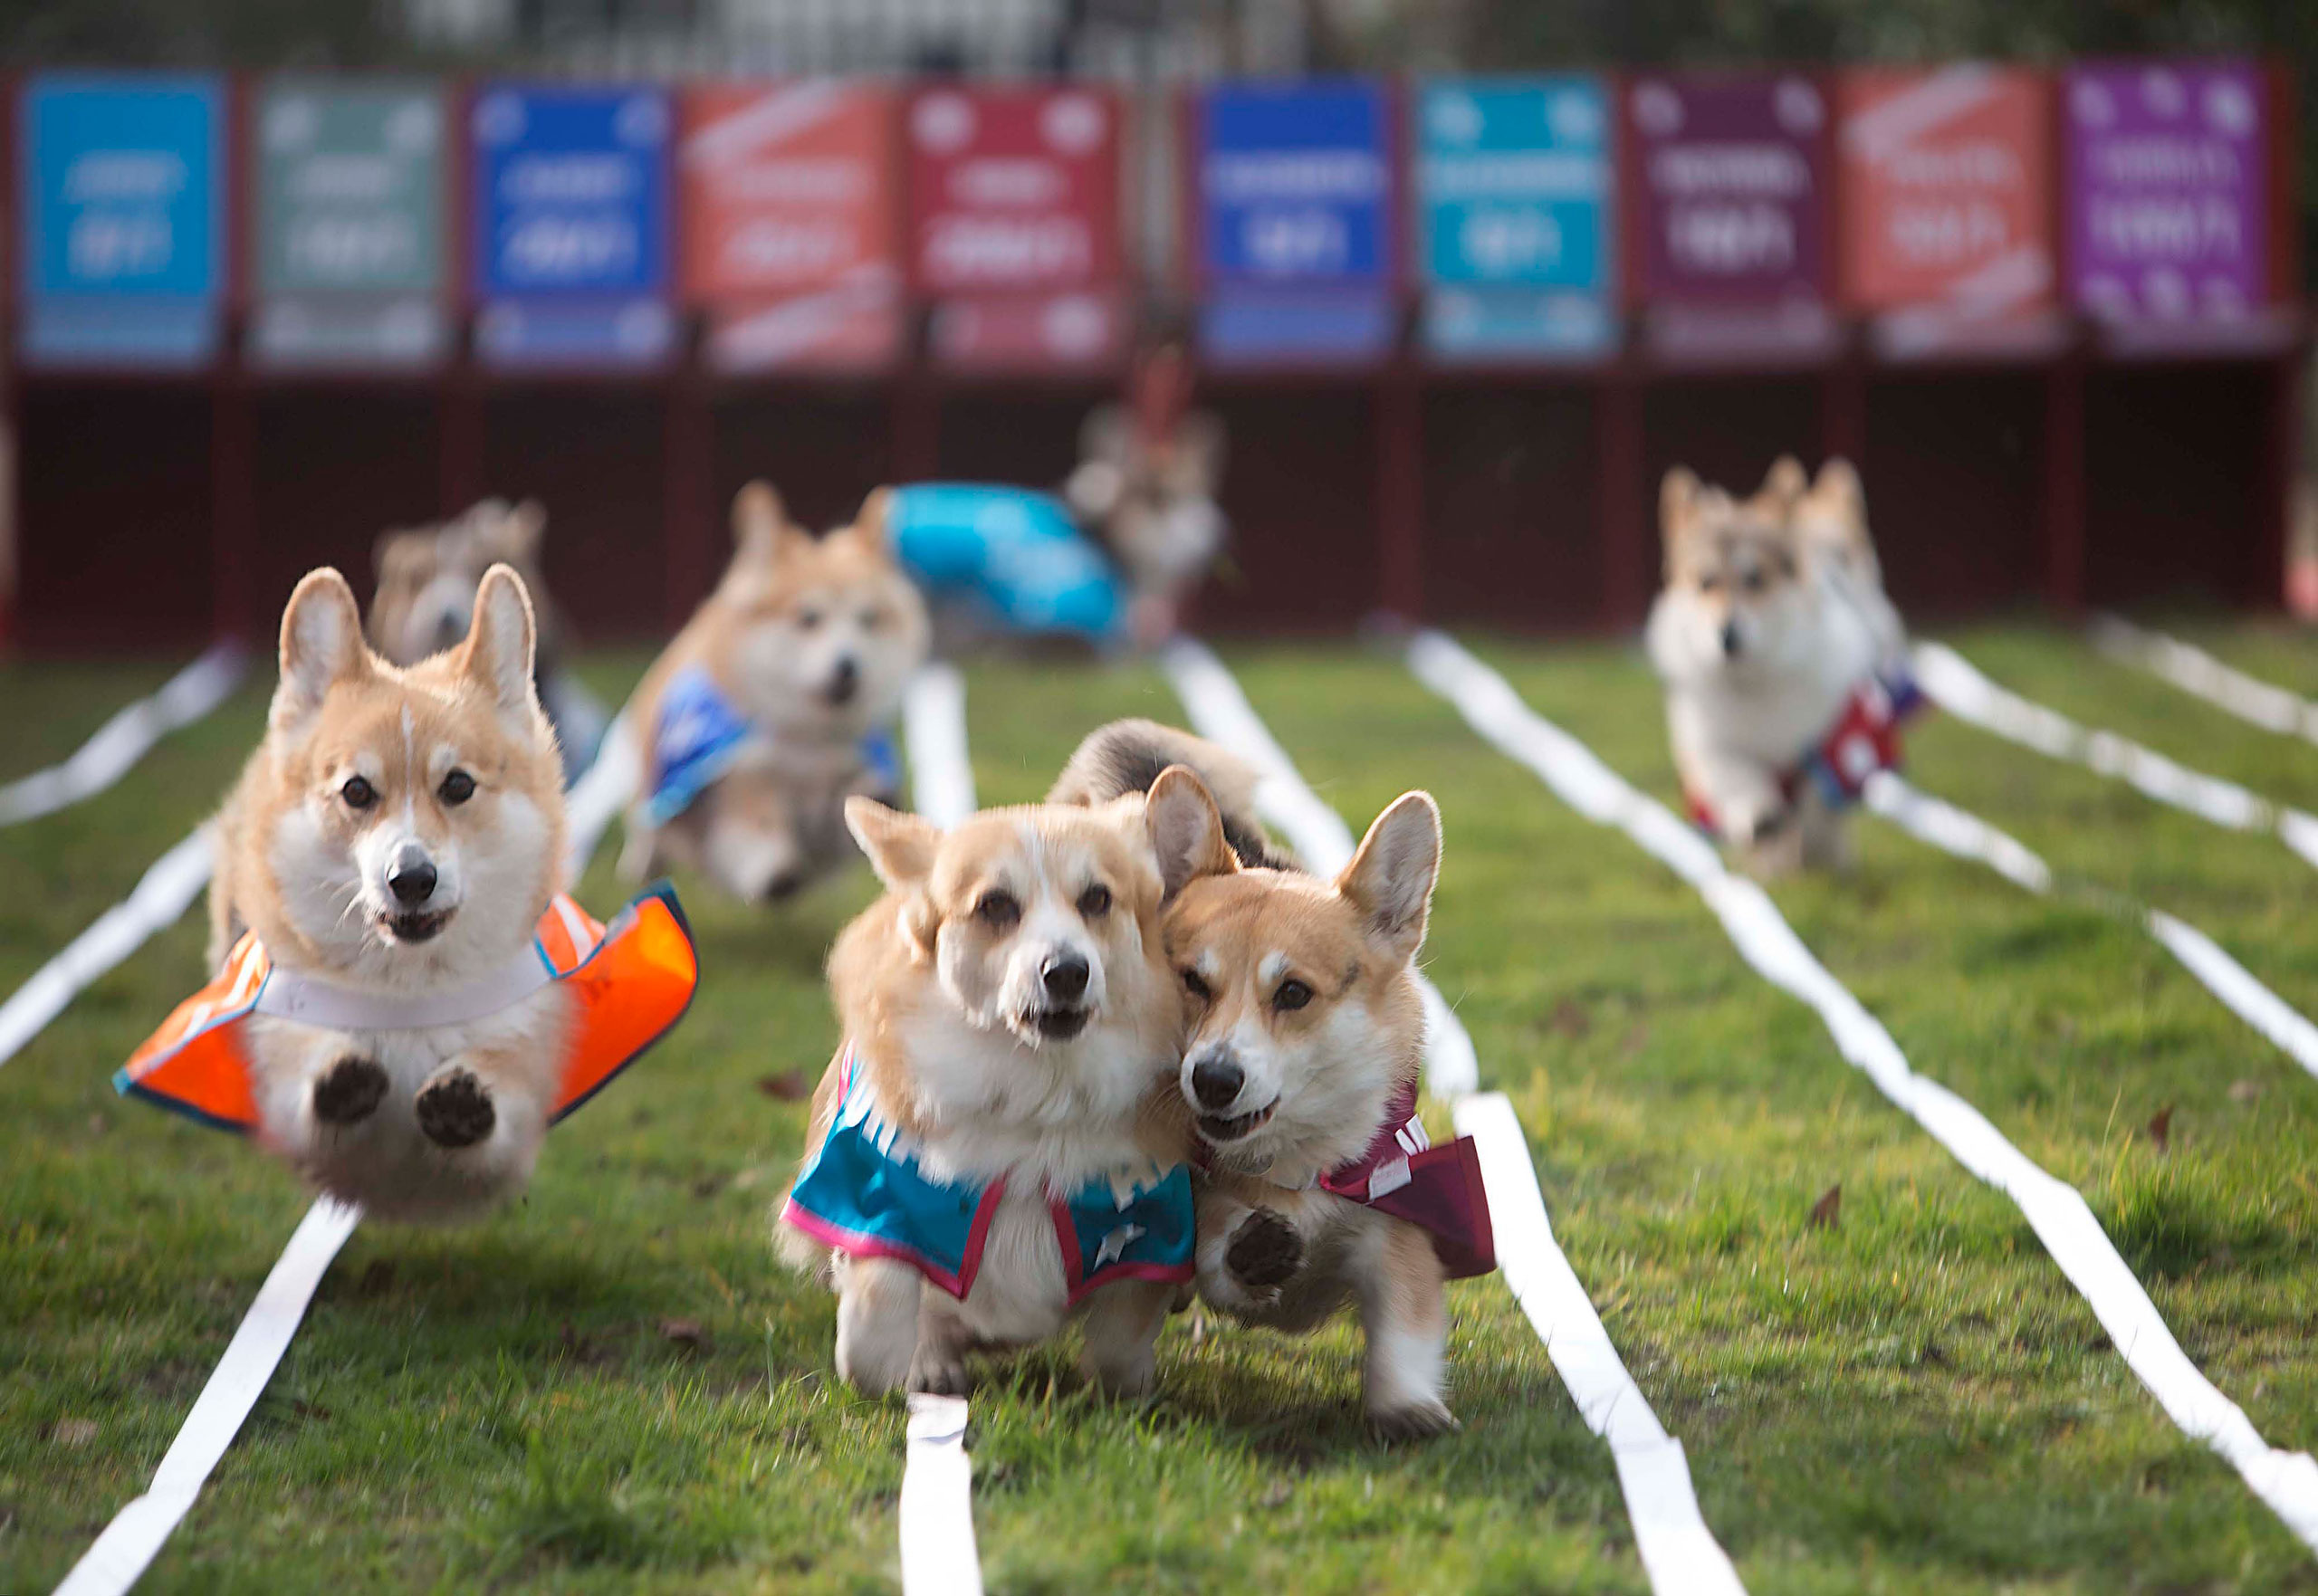 Spencer, Alexandra and Victoria (from left) three of 10 corgis racing against each other, battle it out for first place in the Ladbrokes Barkingham Palace Gold Cup Royal Corgi Race in Bedford Square, London, in the hope of determining the name of the next royal baby, ahead of the Duchess of Cambridge's April due date. The baby was named Alexandra. March 19, 2015.